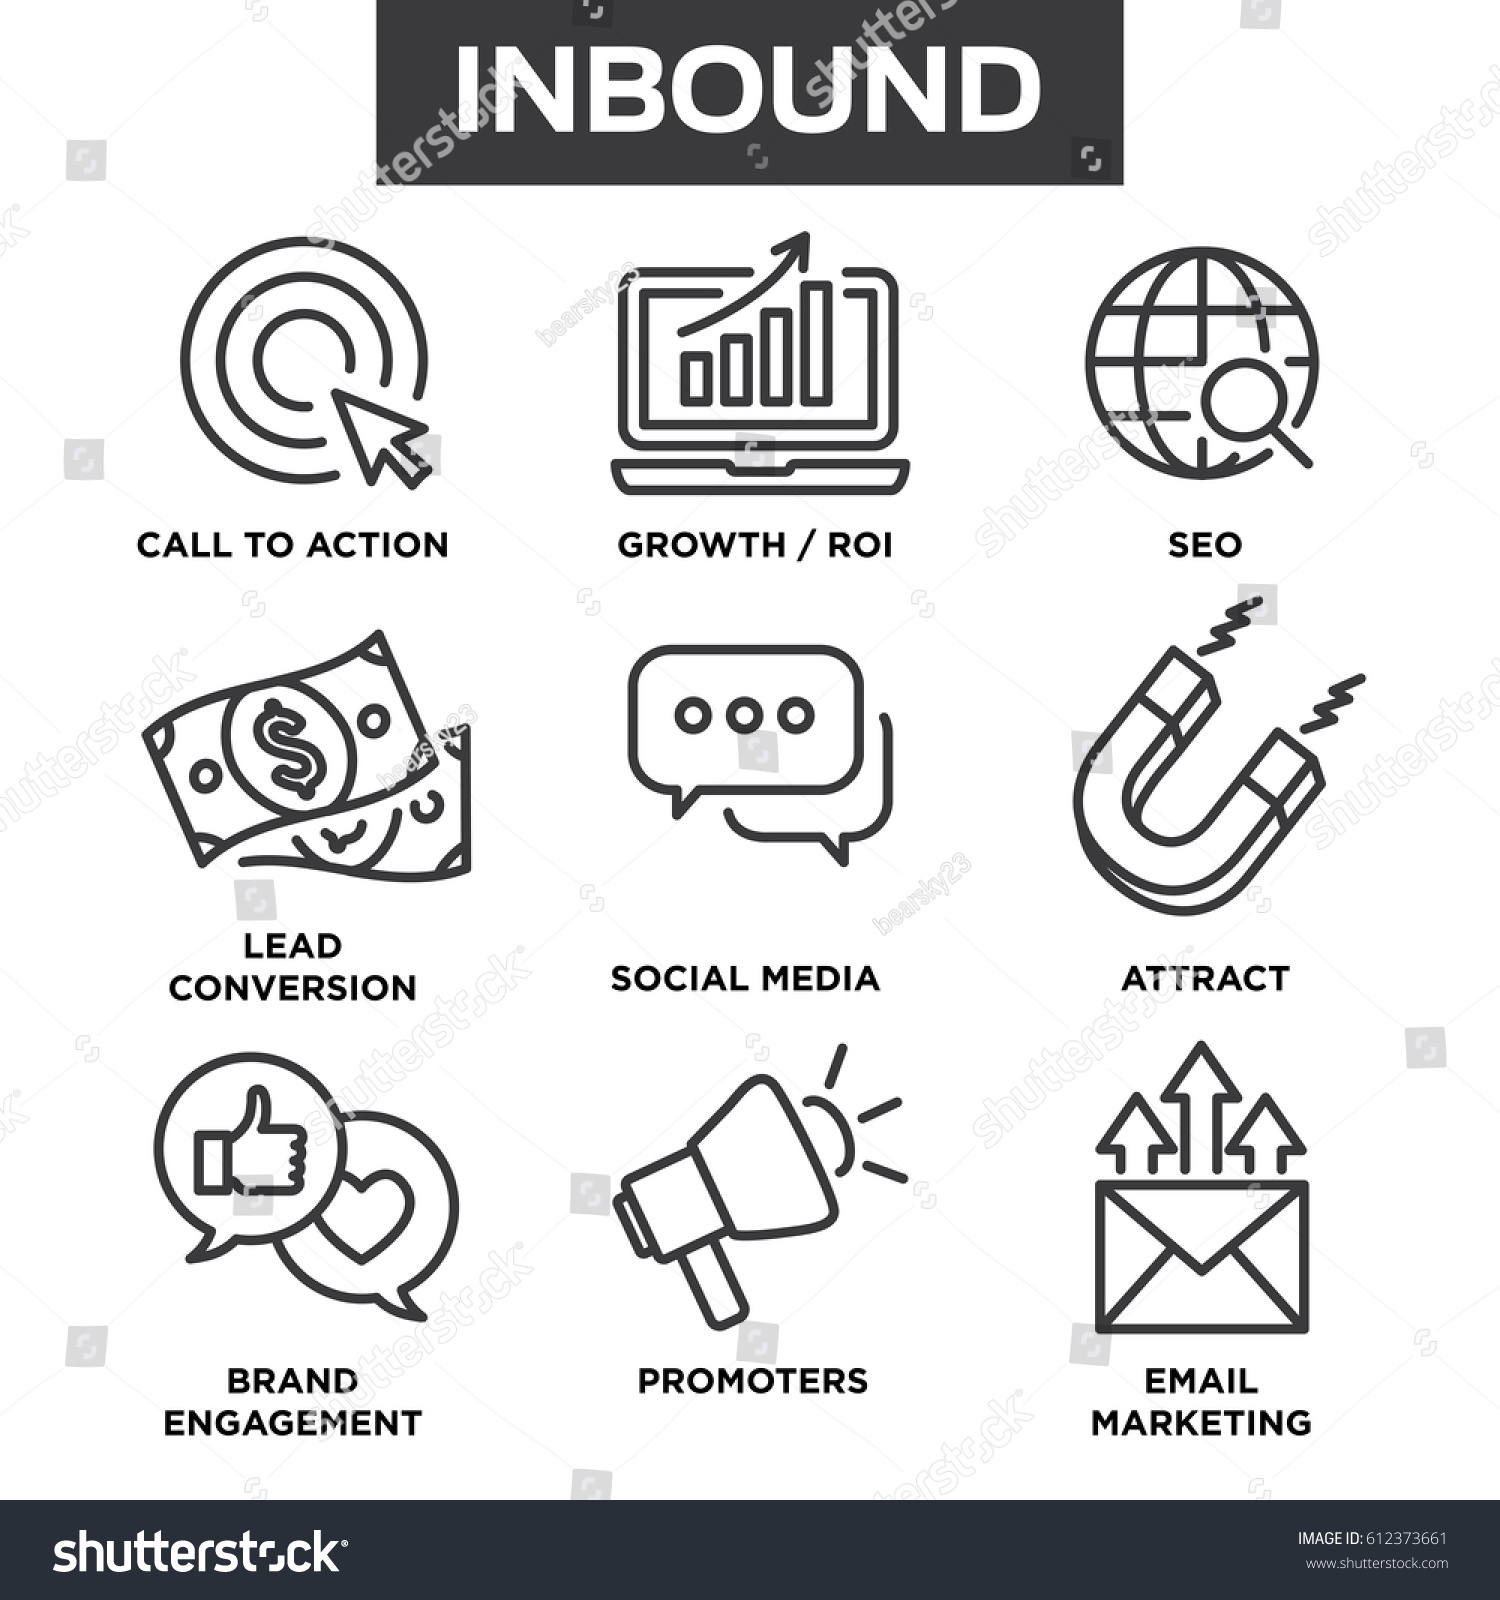 Inbound Marketing Vector Icons with growth, roi, call to action, seo, lead conversion, social media, attract, brand engagement, promoters, campaign, etc #612373661